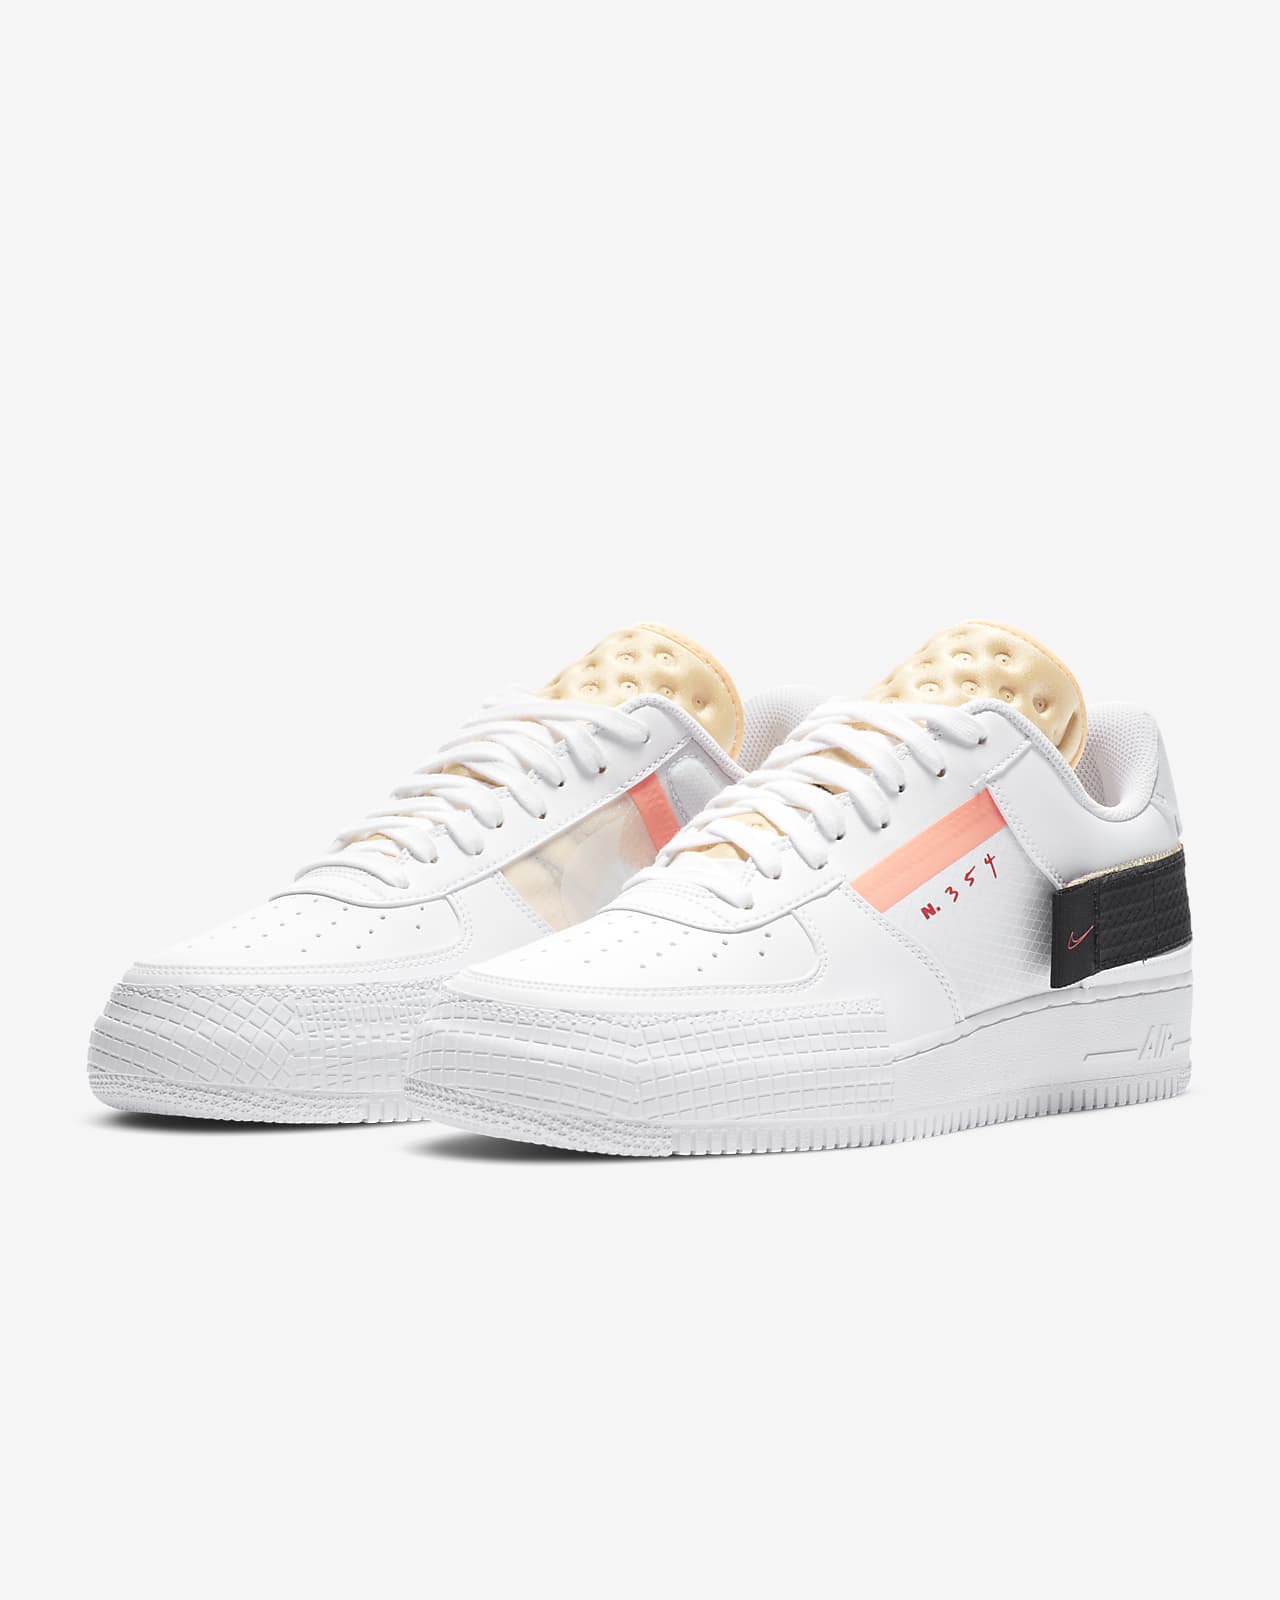 Chaussure Nike AF1-Type pour Homme